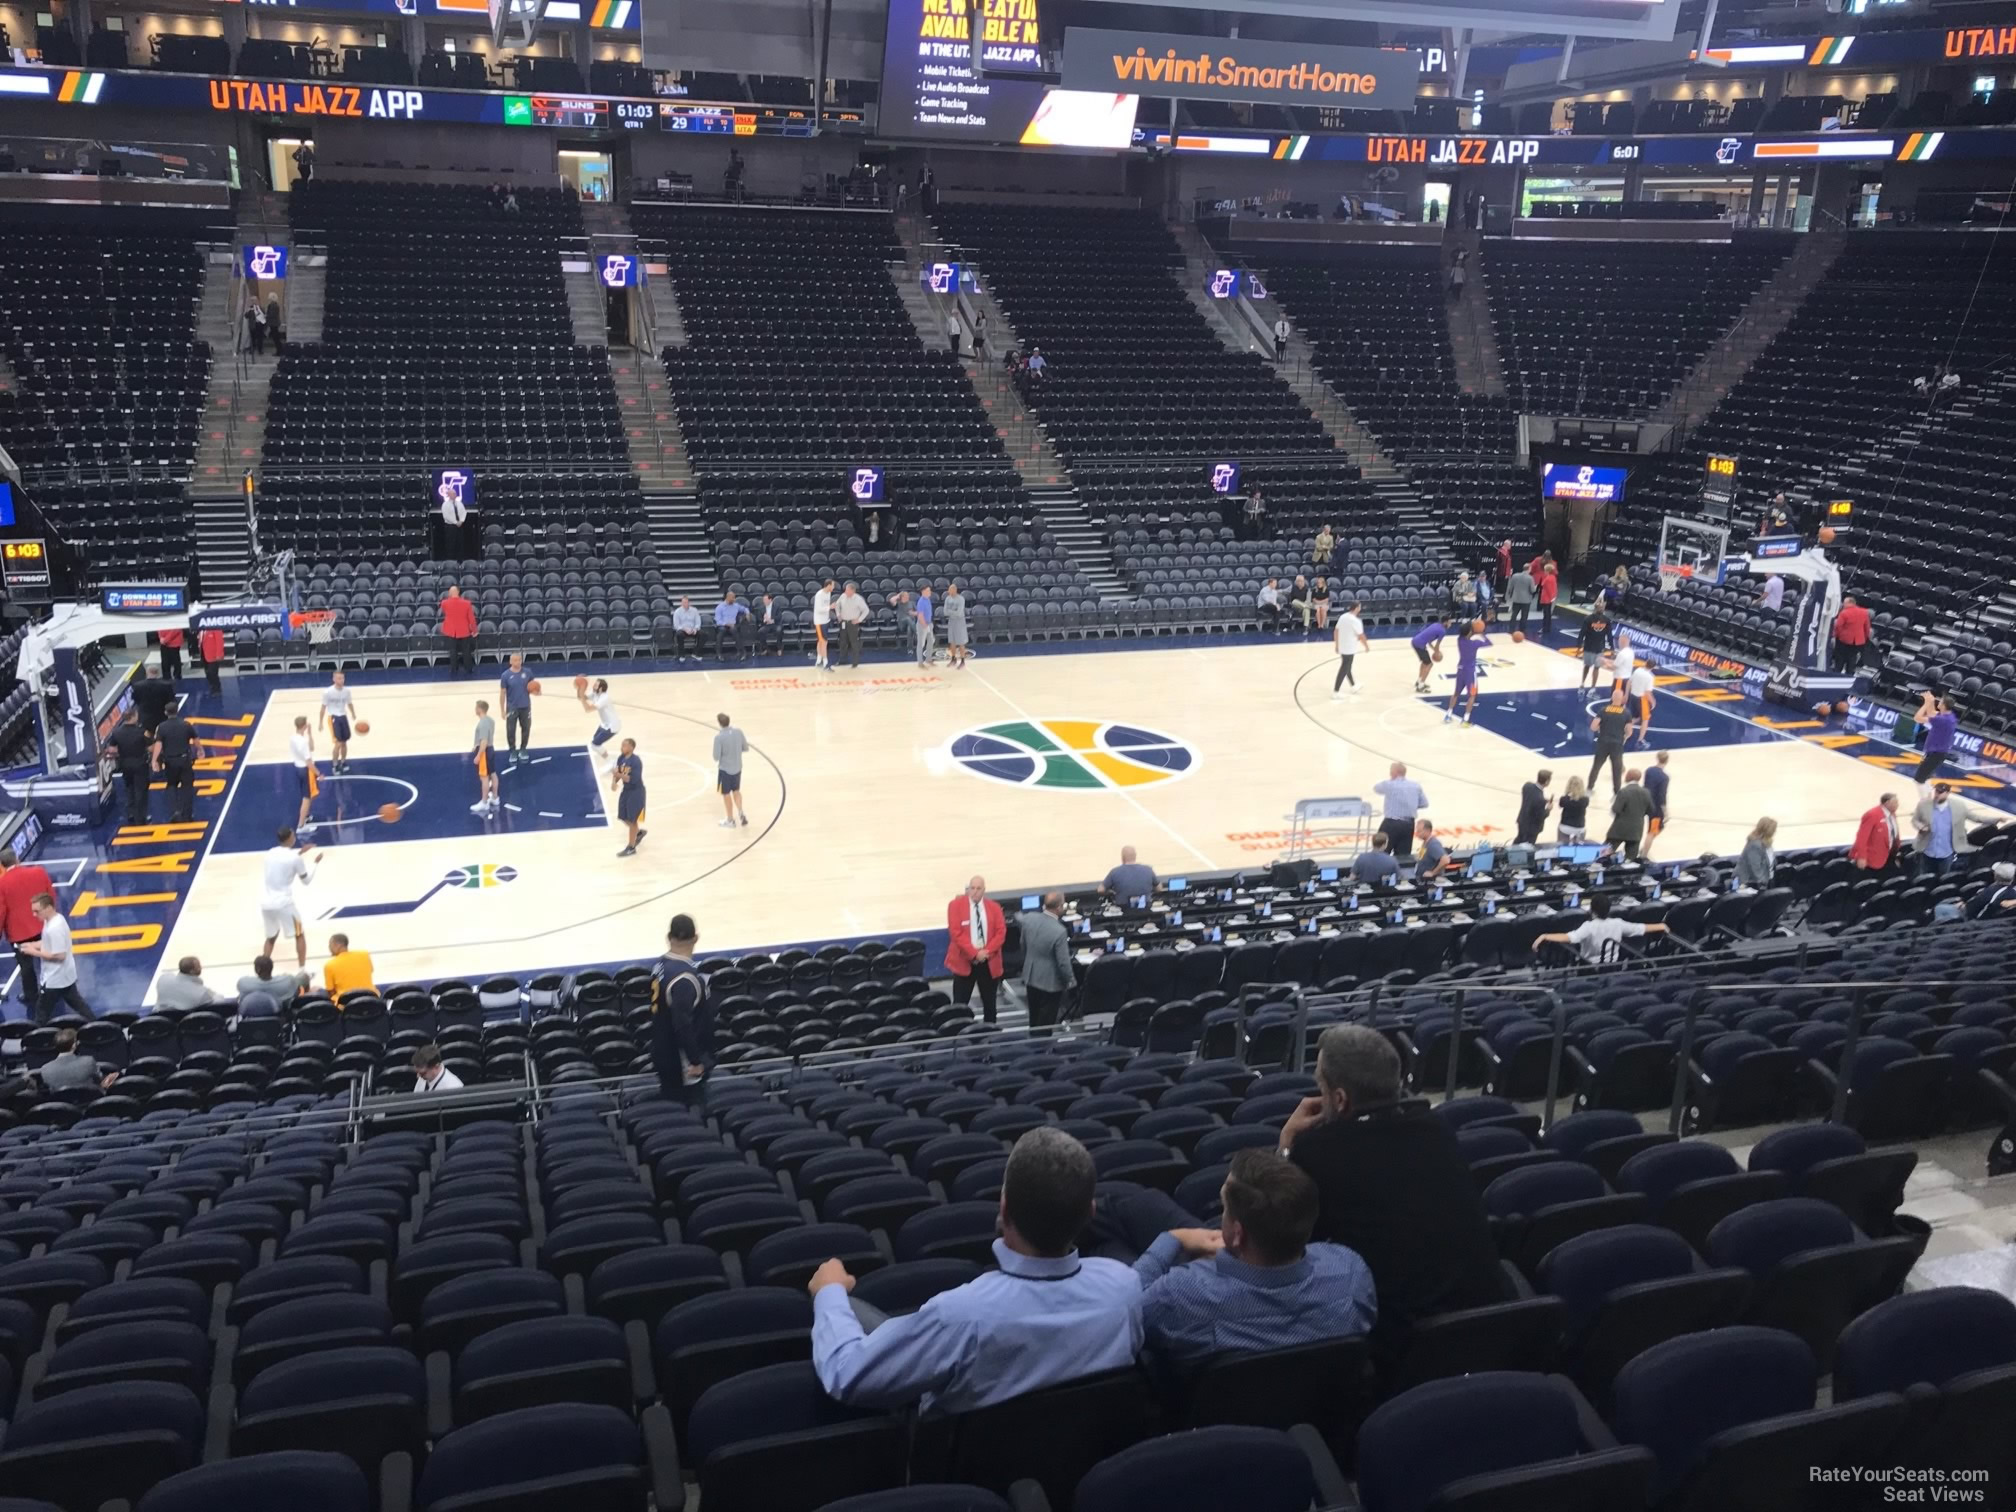 section 8, row 20 seat view  for basketball - delta center